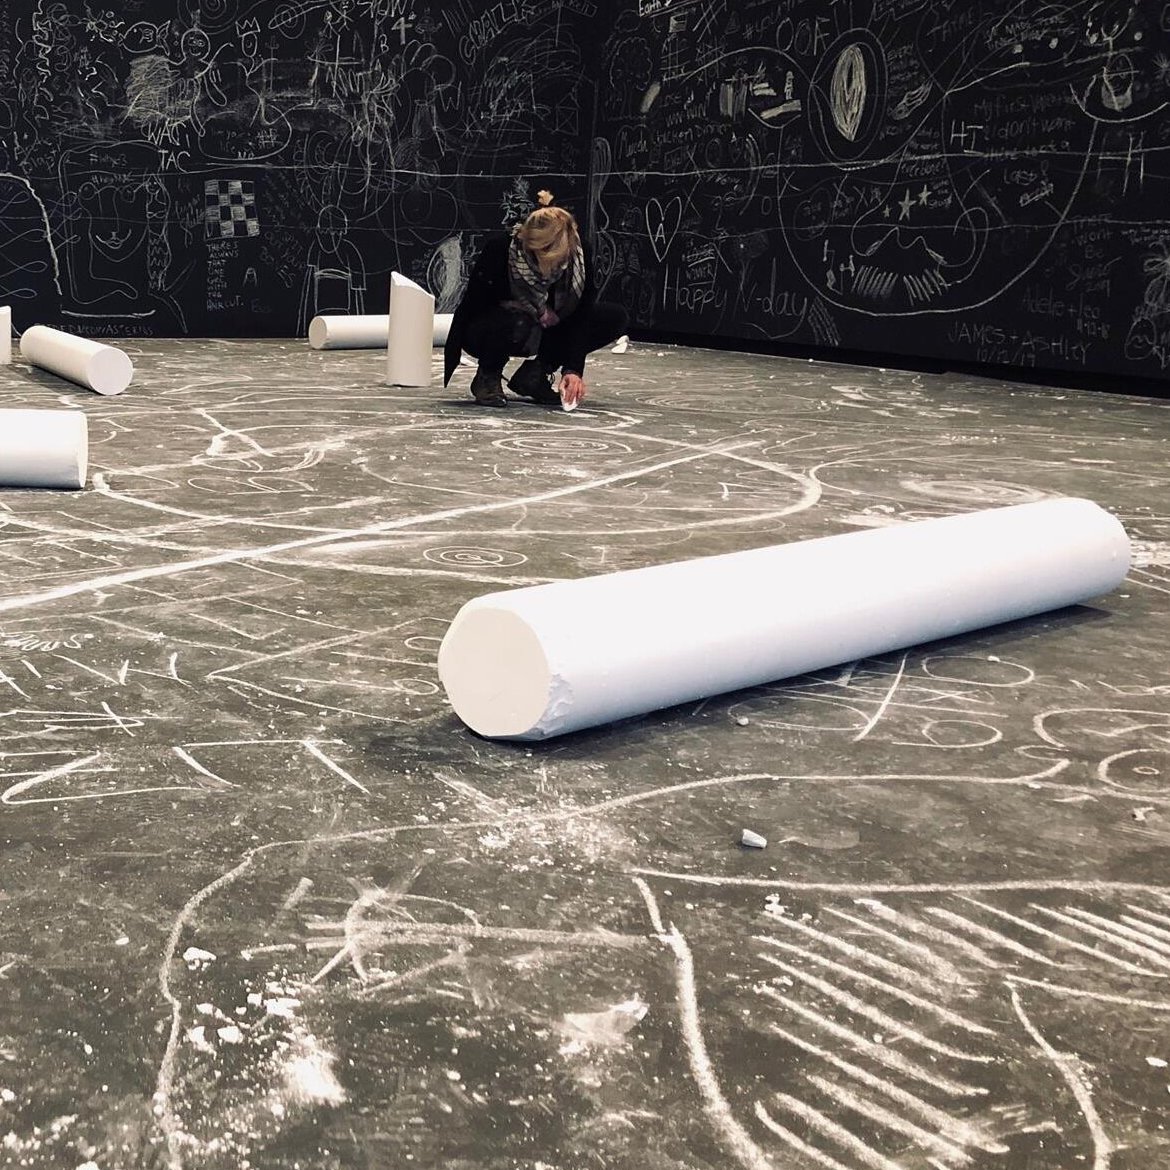 An image of Cat Saint-Croix in an interactive art exhibit drawing with large pieces of chalk.